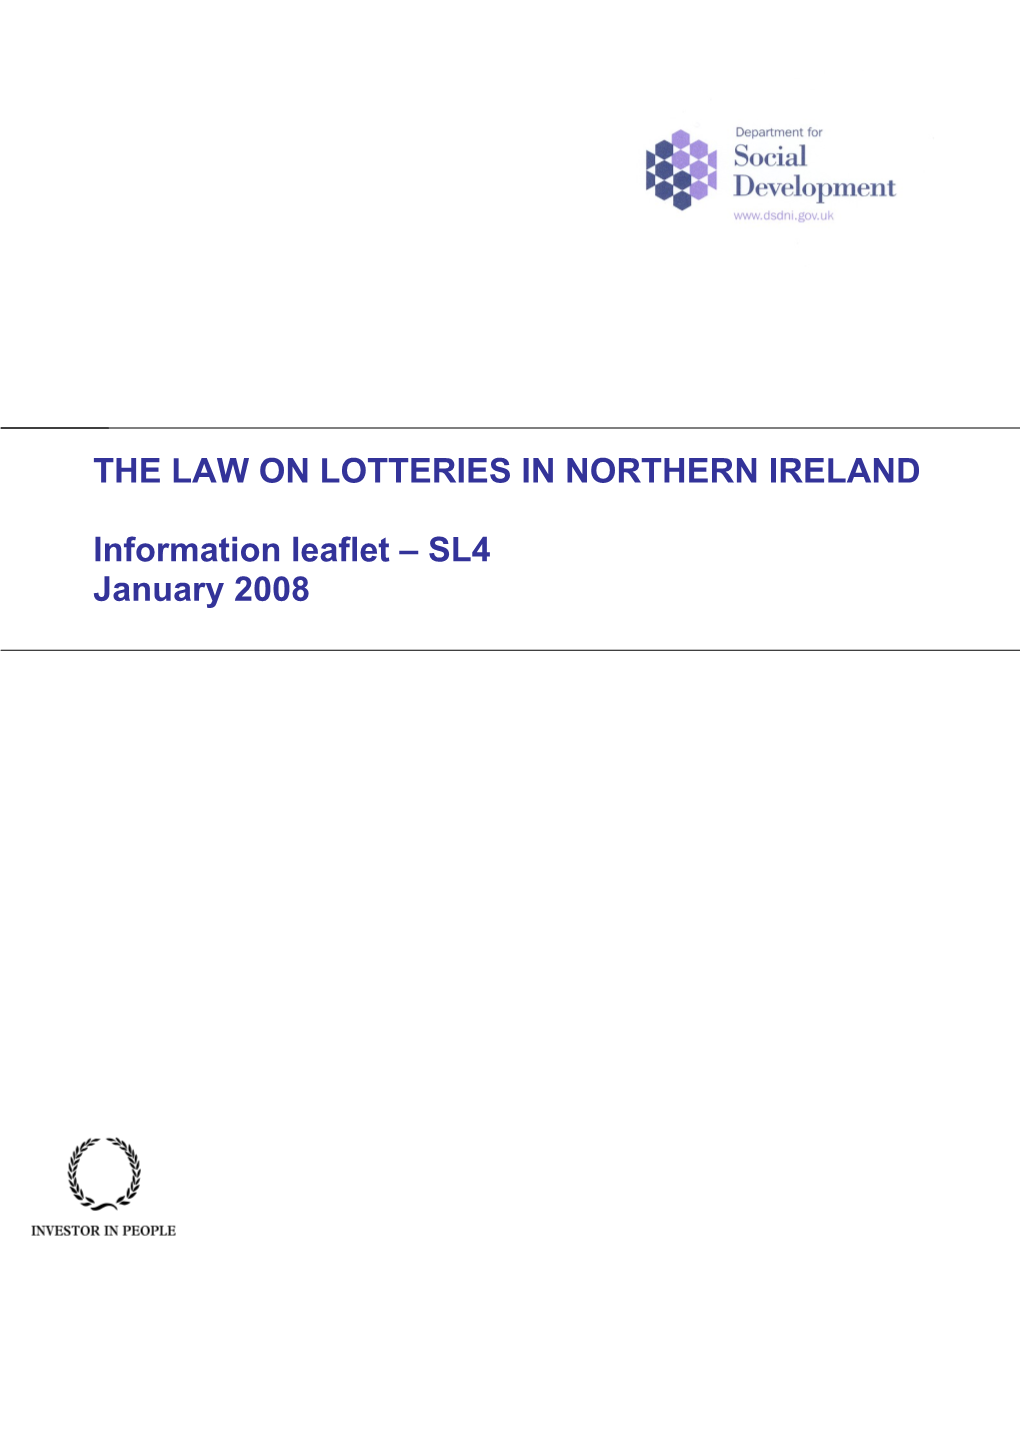 Lotteries and the Law